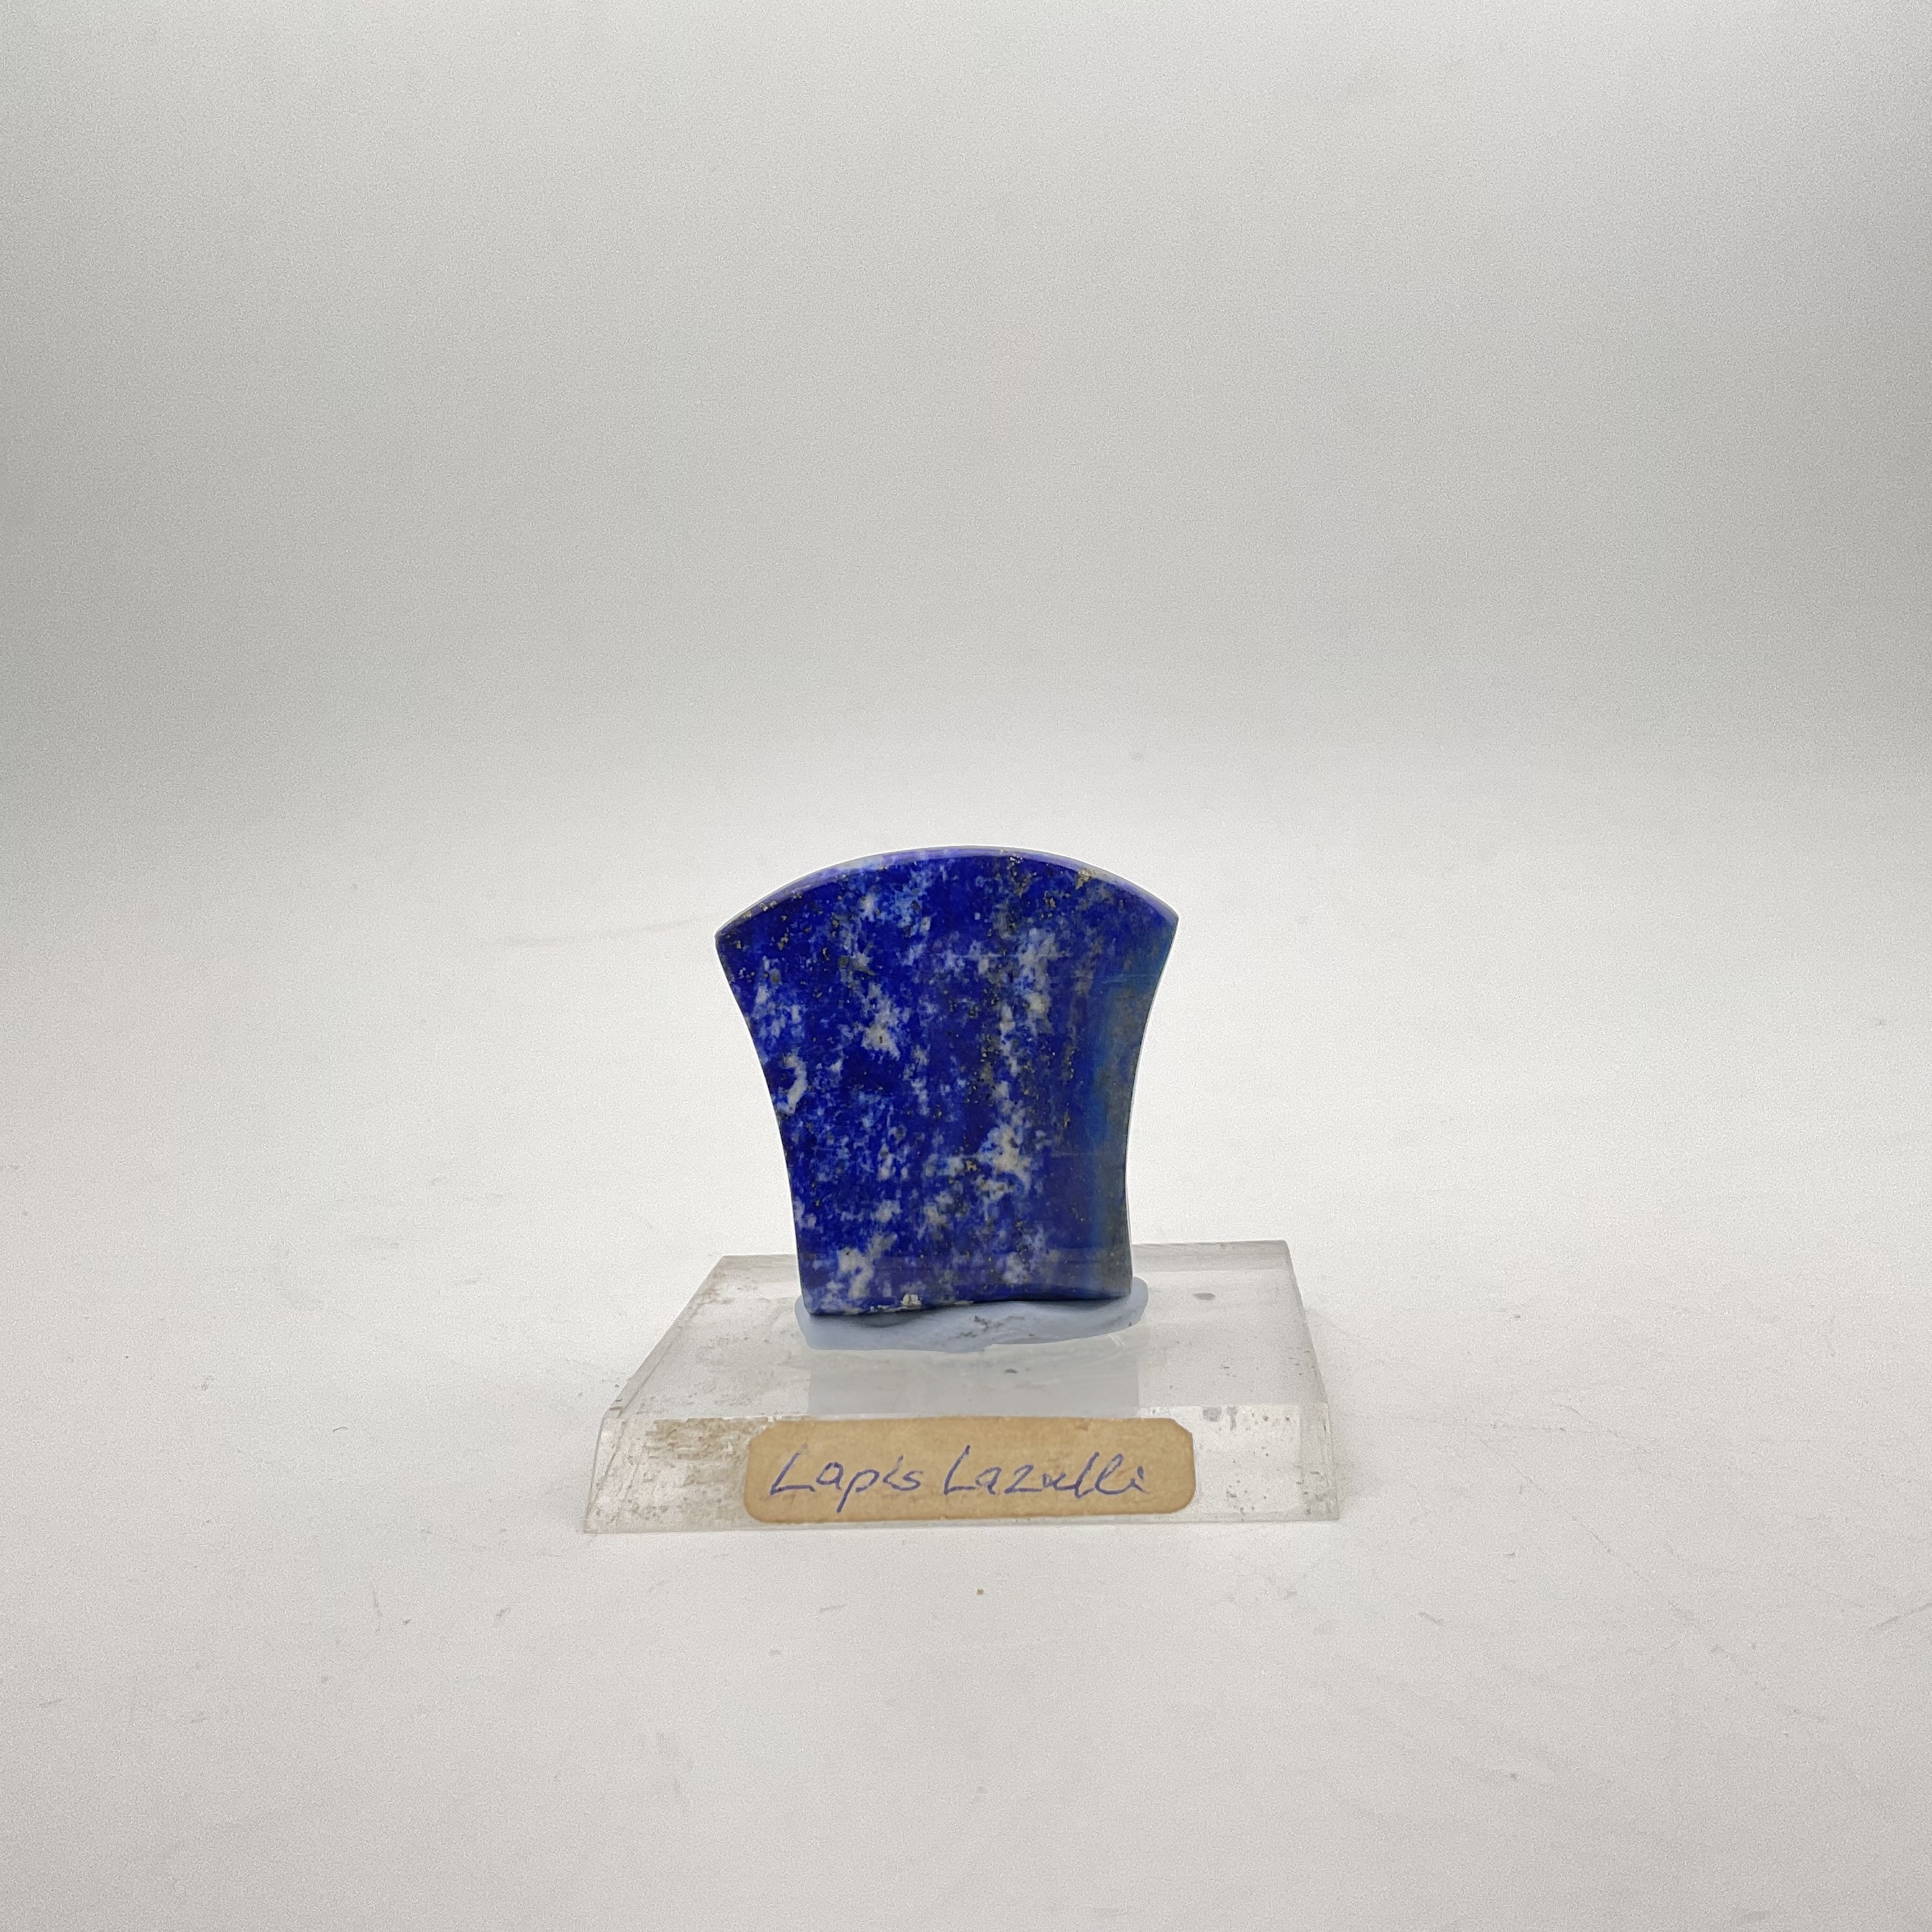 A Lapis Lazuli carving from Afghanistan